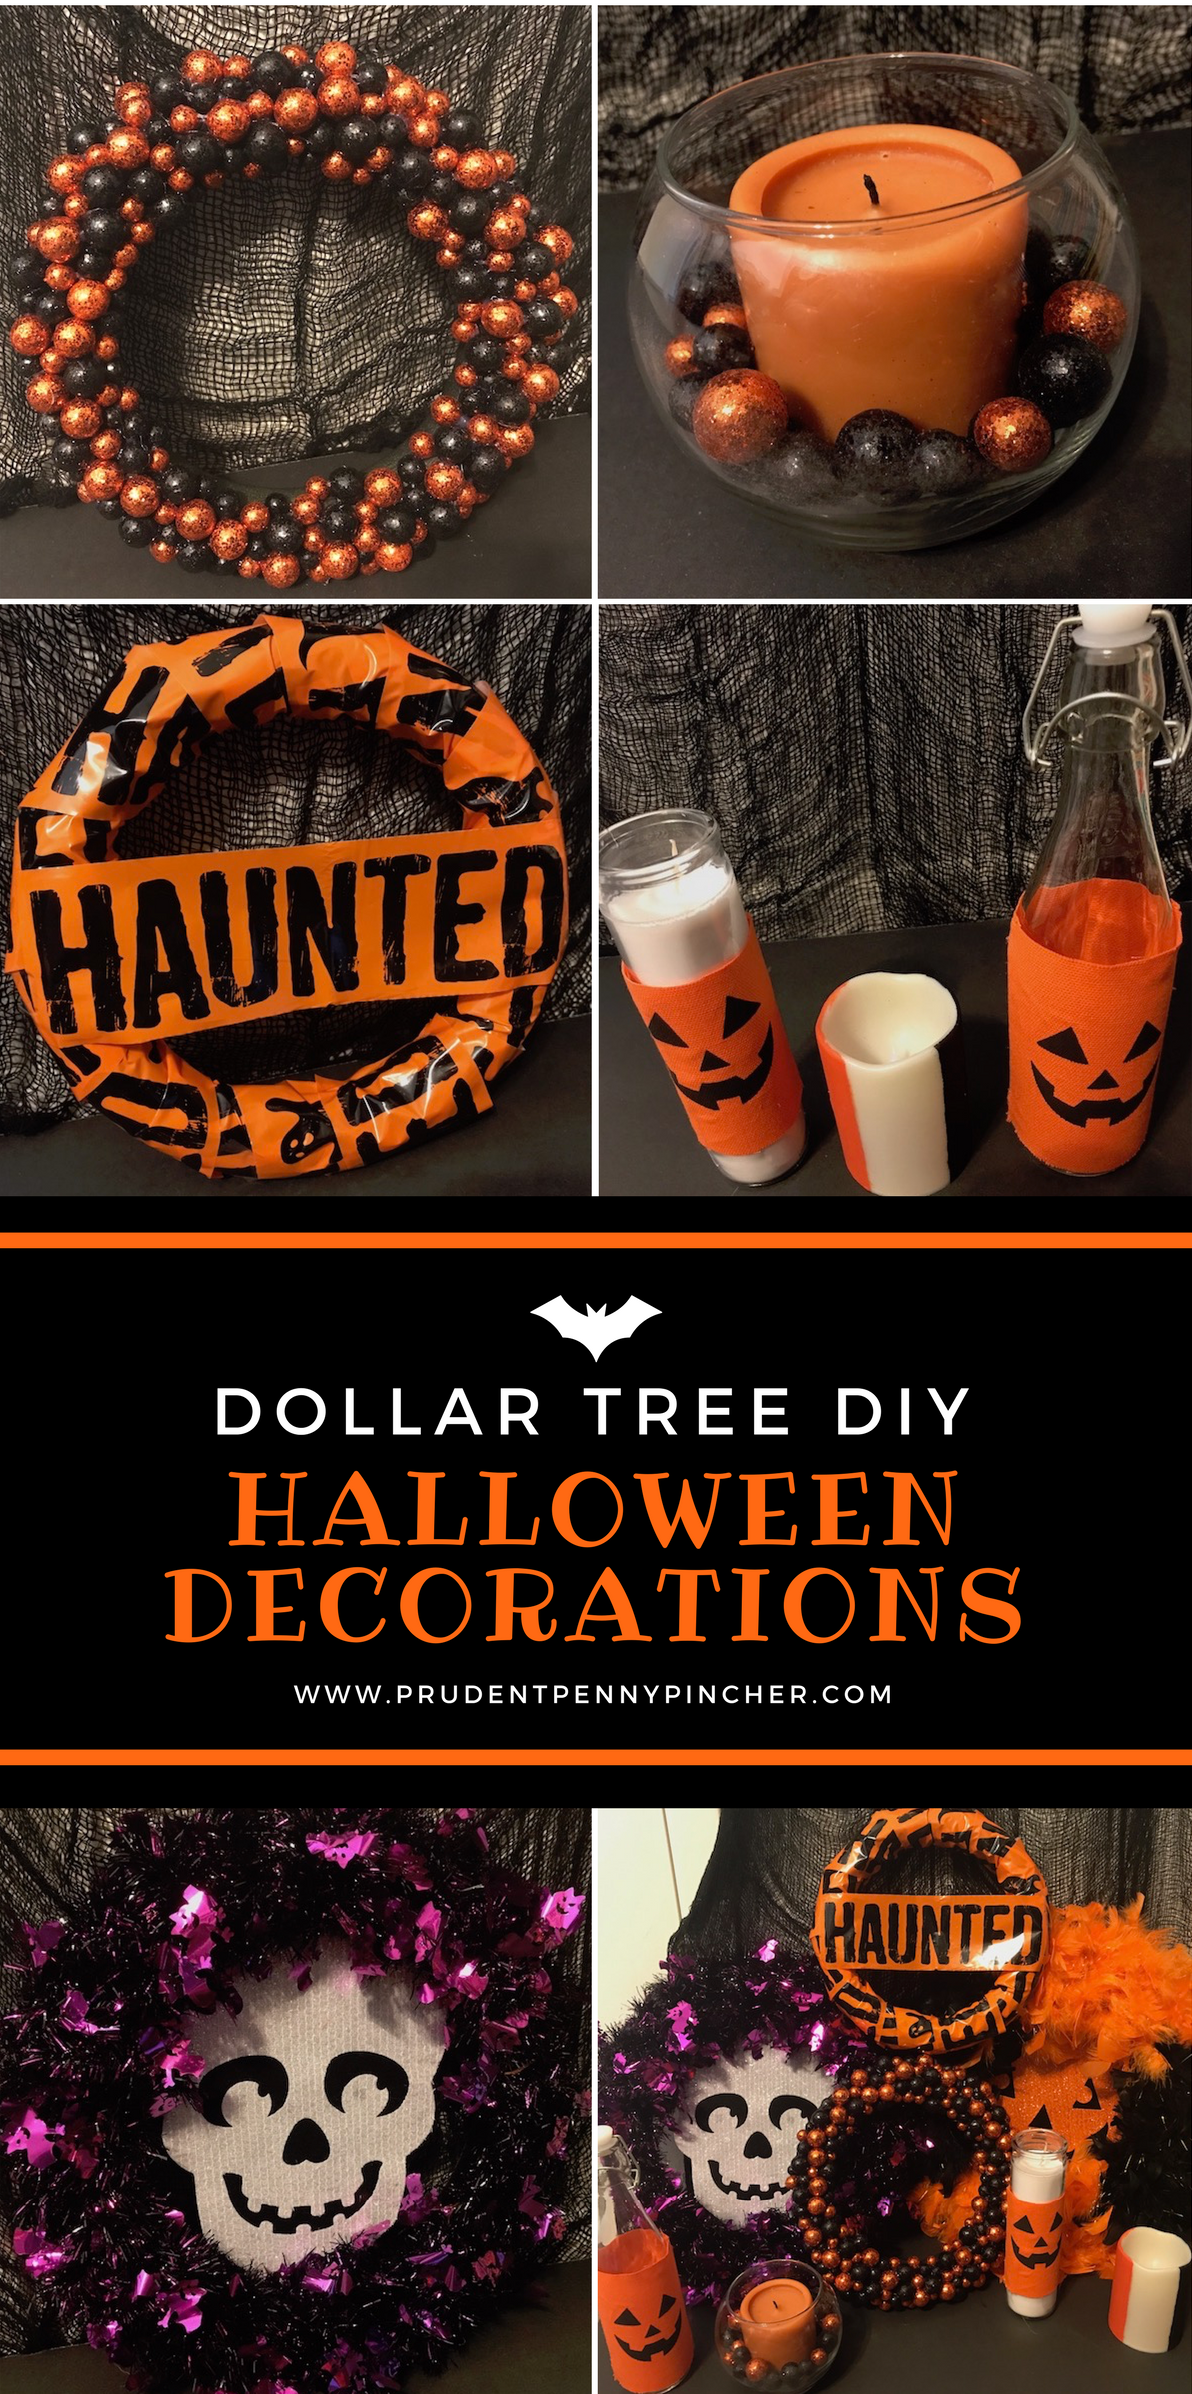 Image Result For Halloween Decorations Dollar